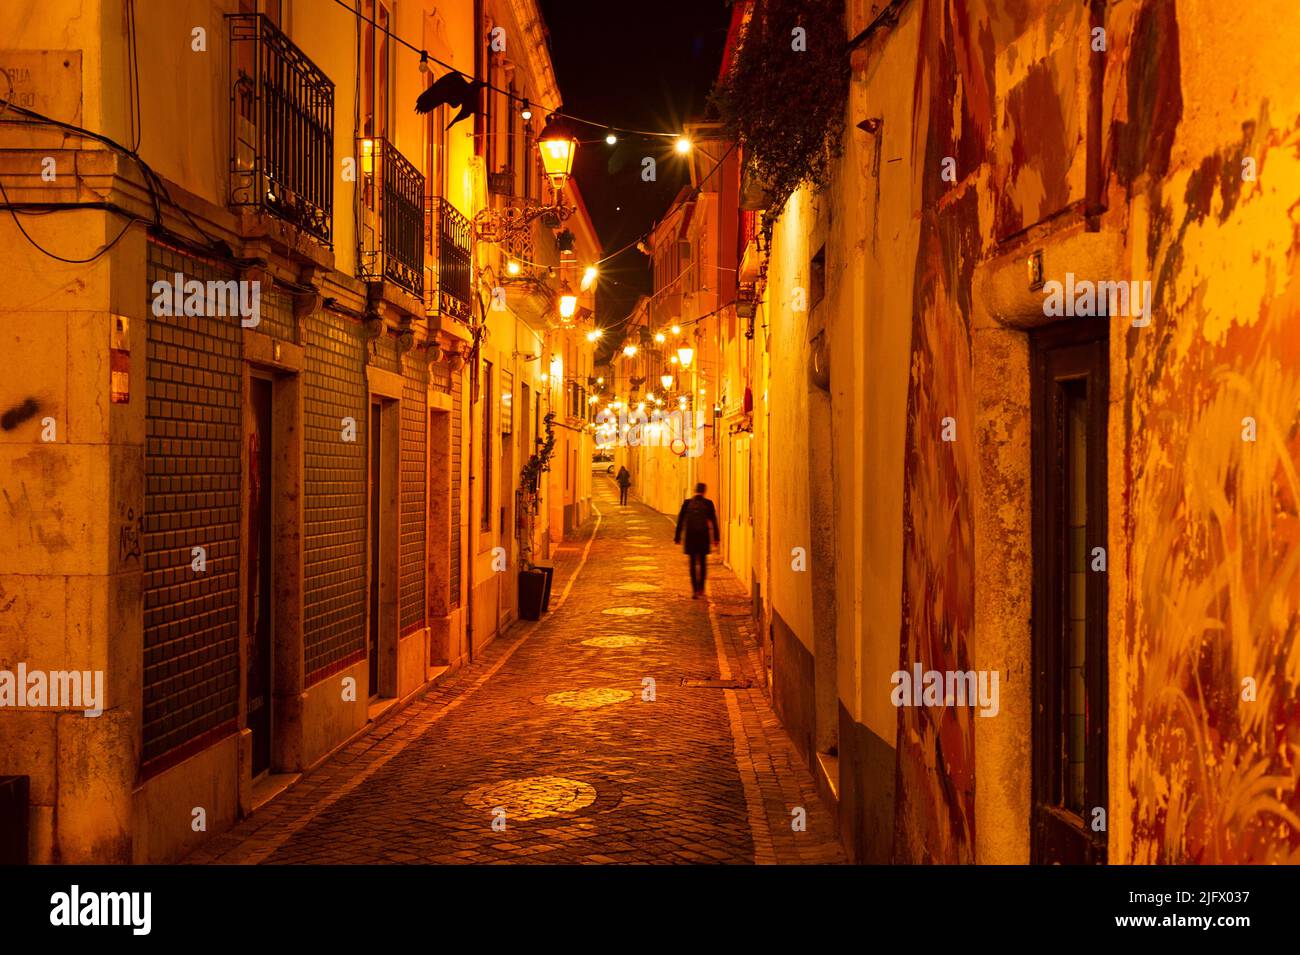 People at night narrow street of traditional architecture illuminated with lanterns, cozy light, Porto, Portugal Stock Photo